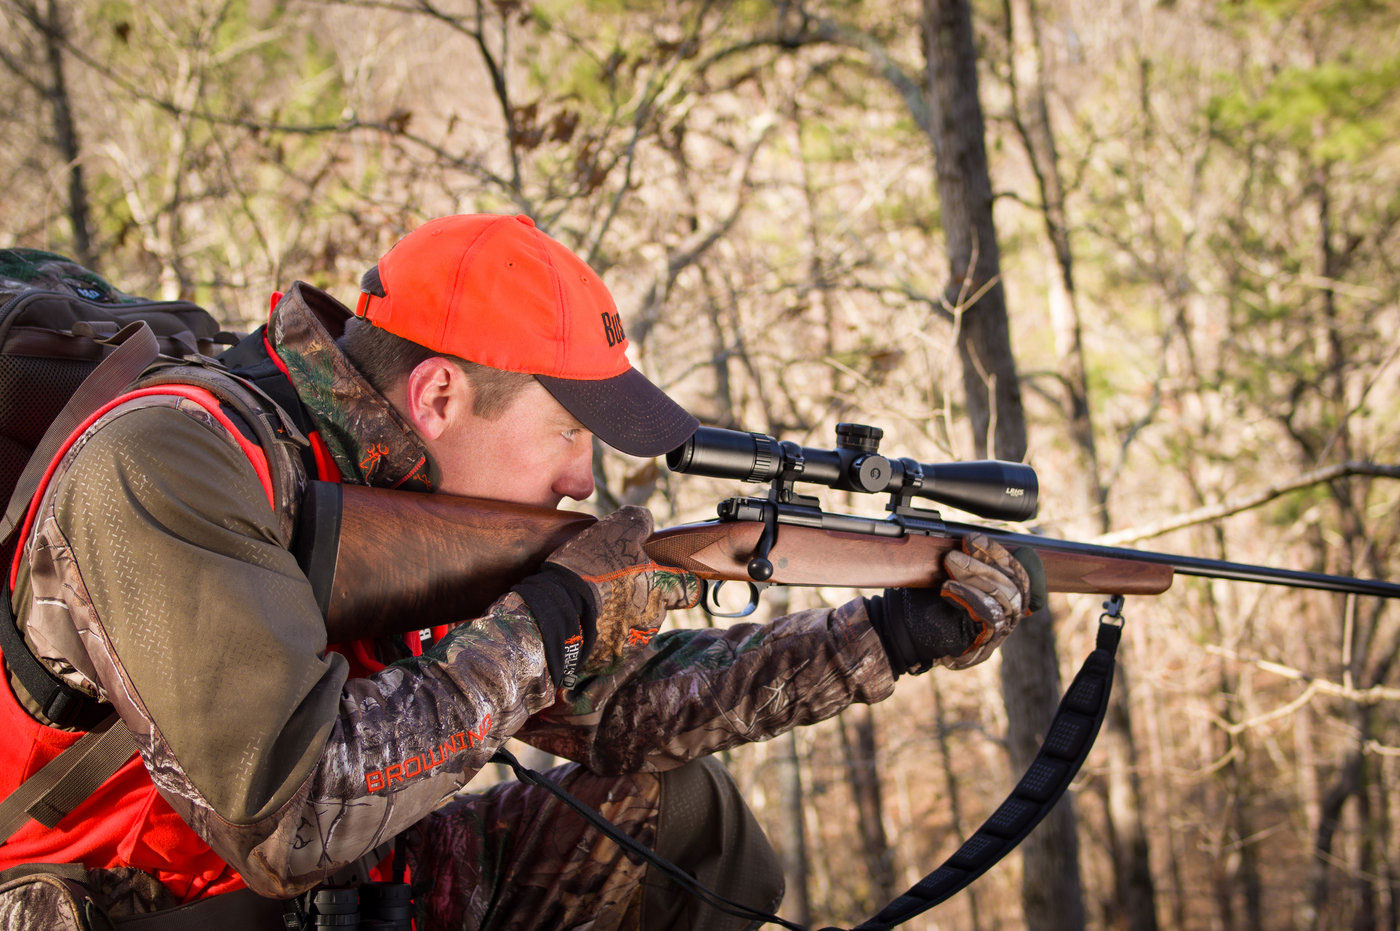 A hunter aiming a rifle in the woods.